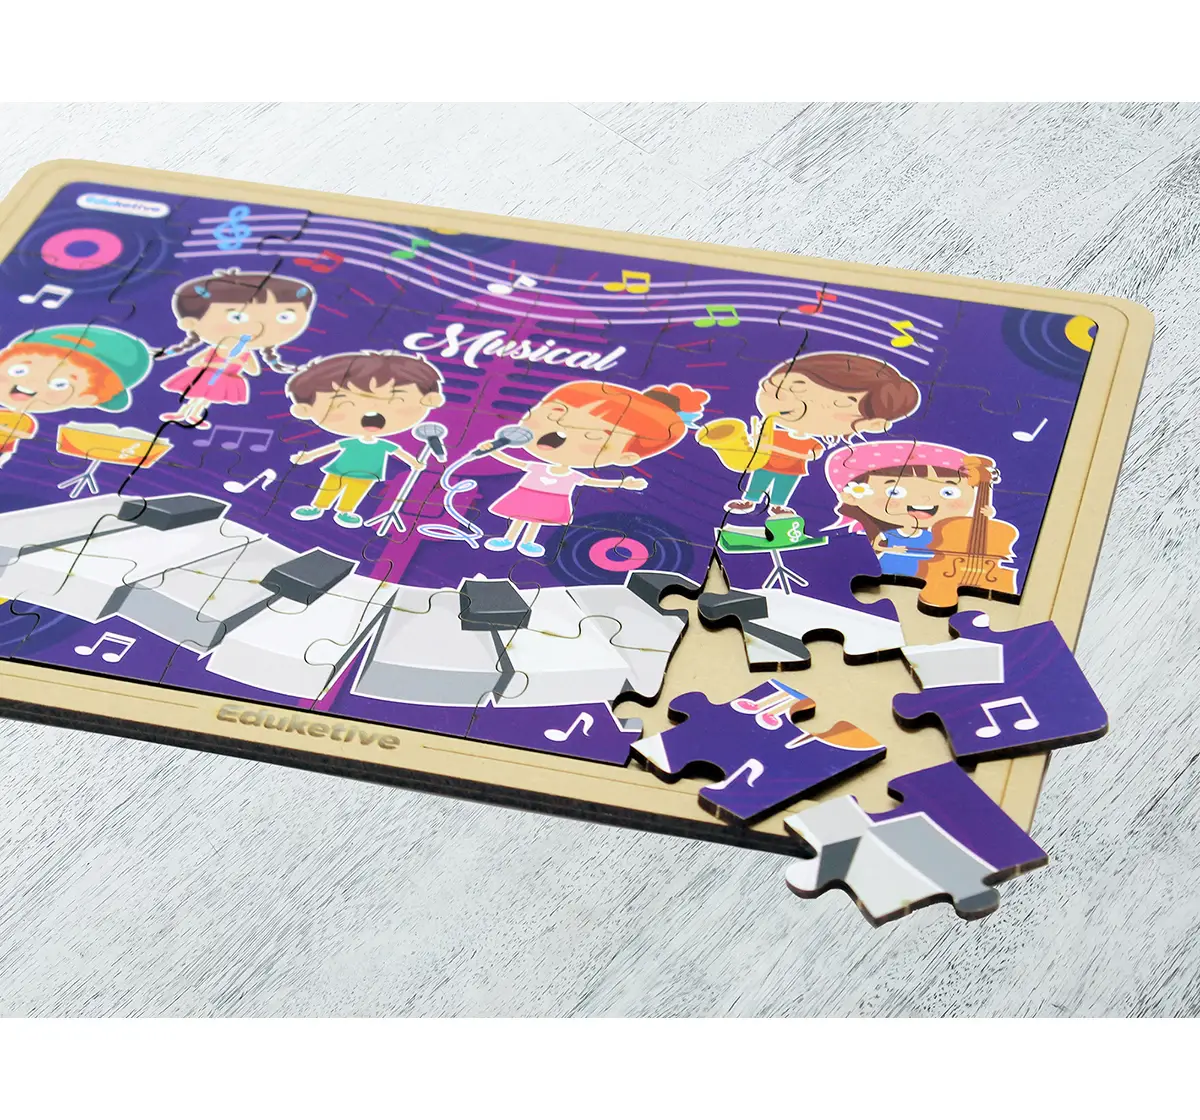 Eduketive PuzzleDecor The Musical Decorative 40 Pieces Jigsaw Puzzle with Stand Kids Age 3-9 Years Preschool